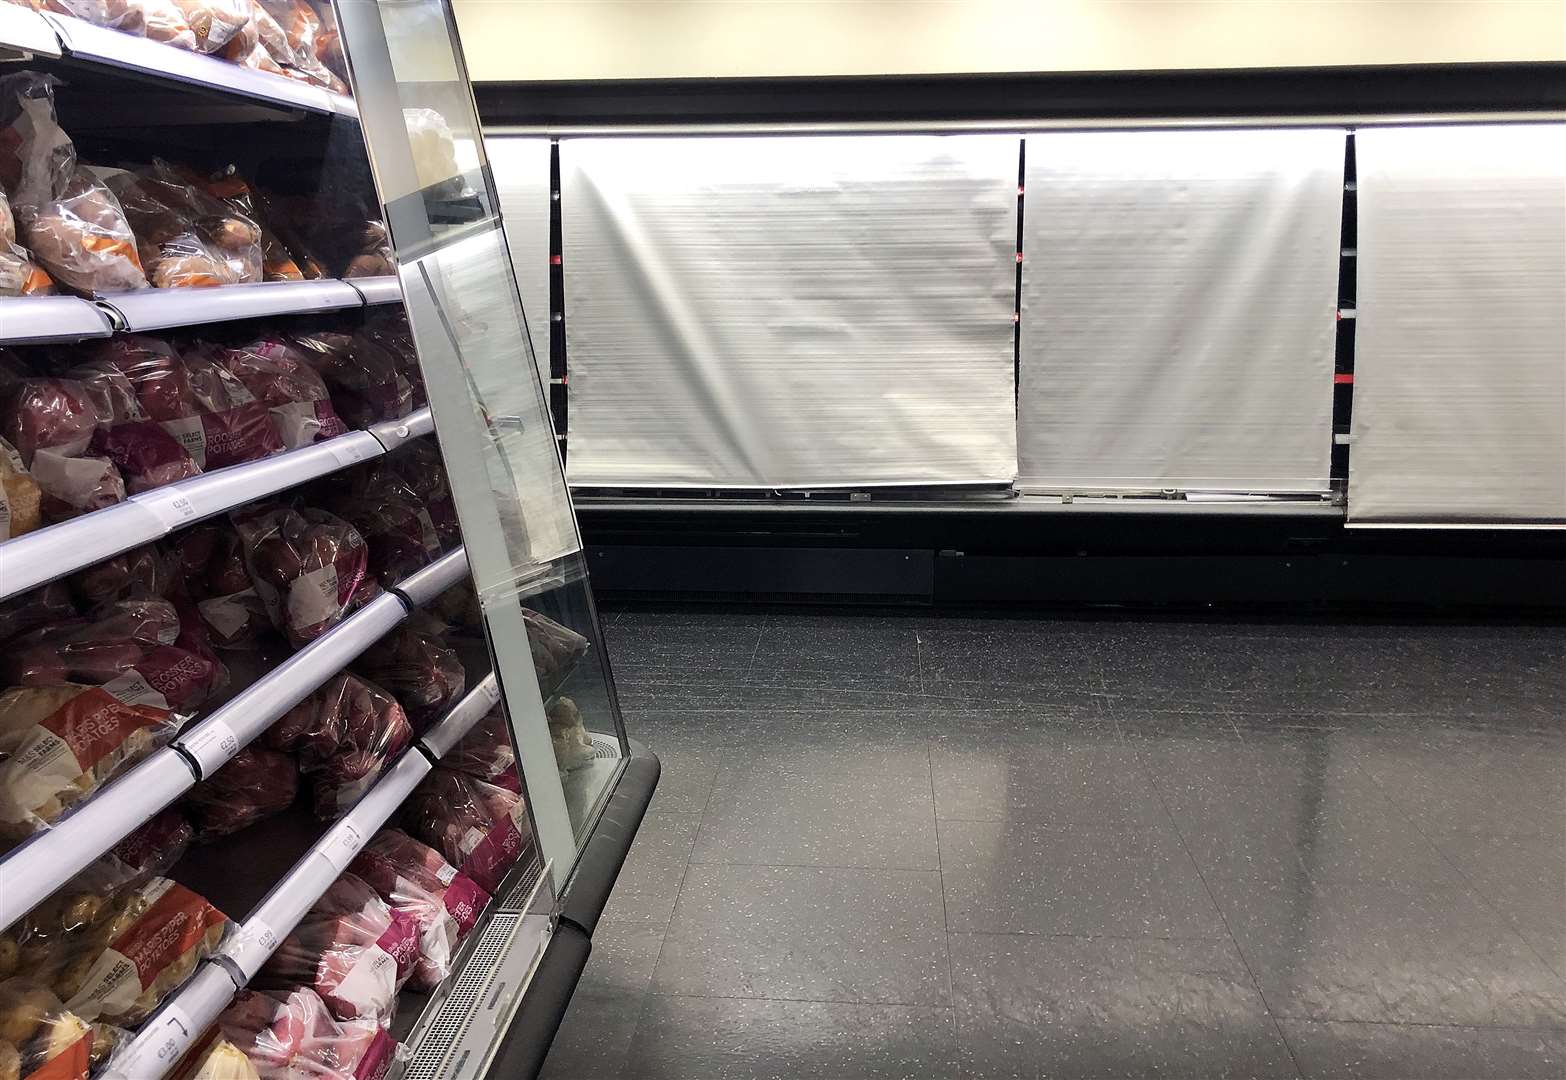 Depleted shelves at a supermarket in Dublin (Brian Lawless/PA)